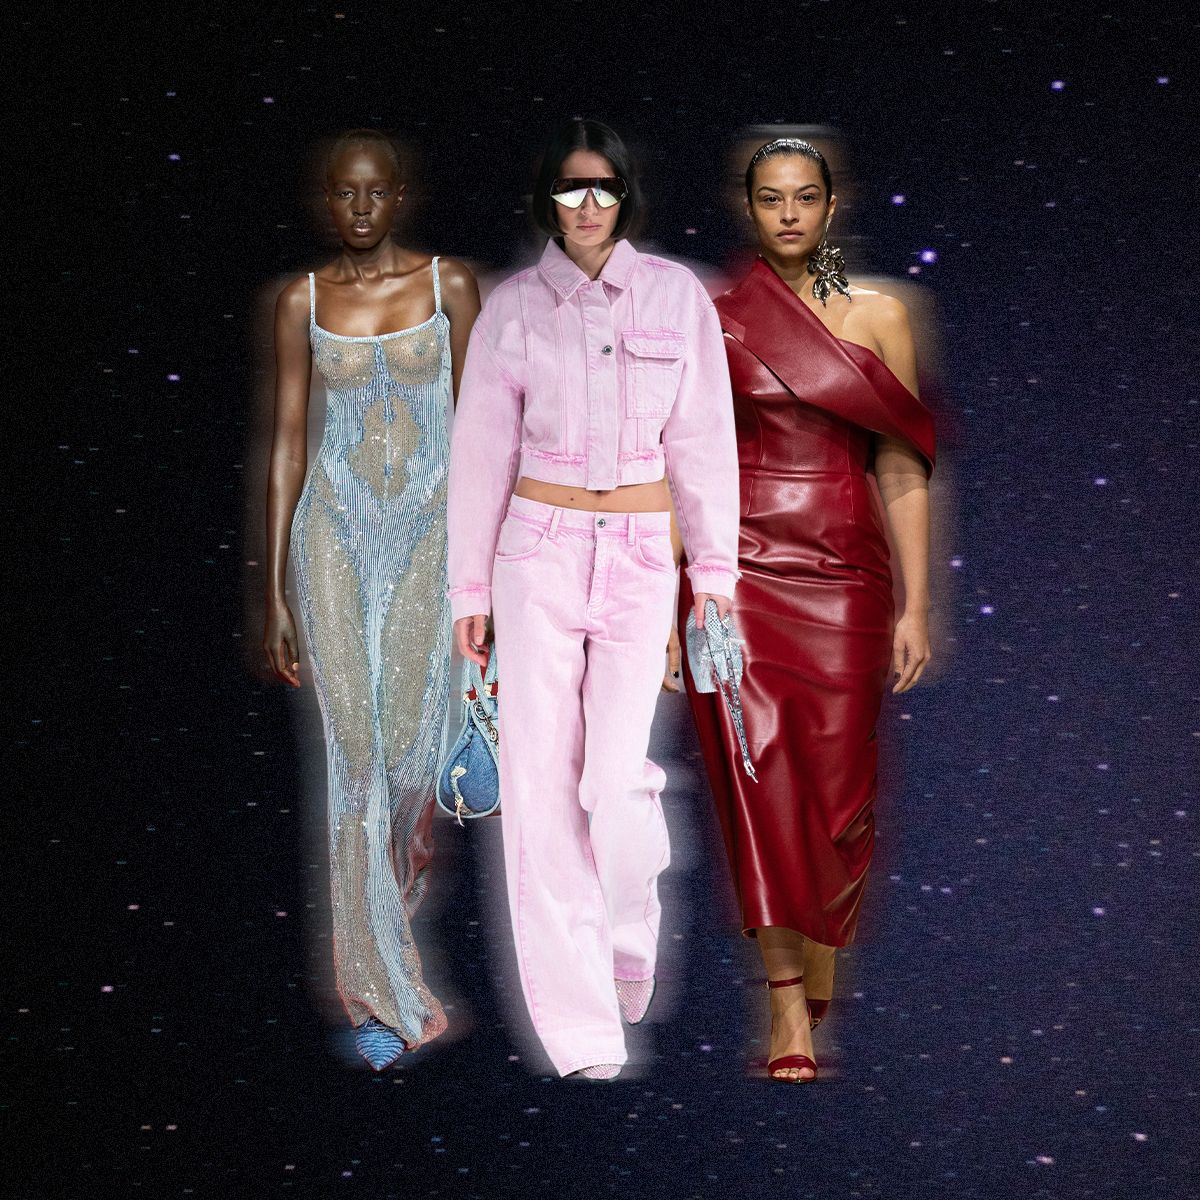 The Fall 2023 Trend to Adopt Based on Your Zodiac Sign